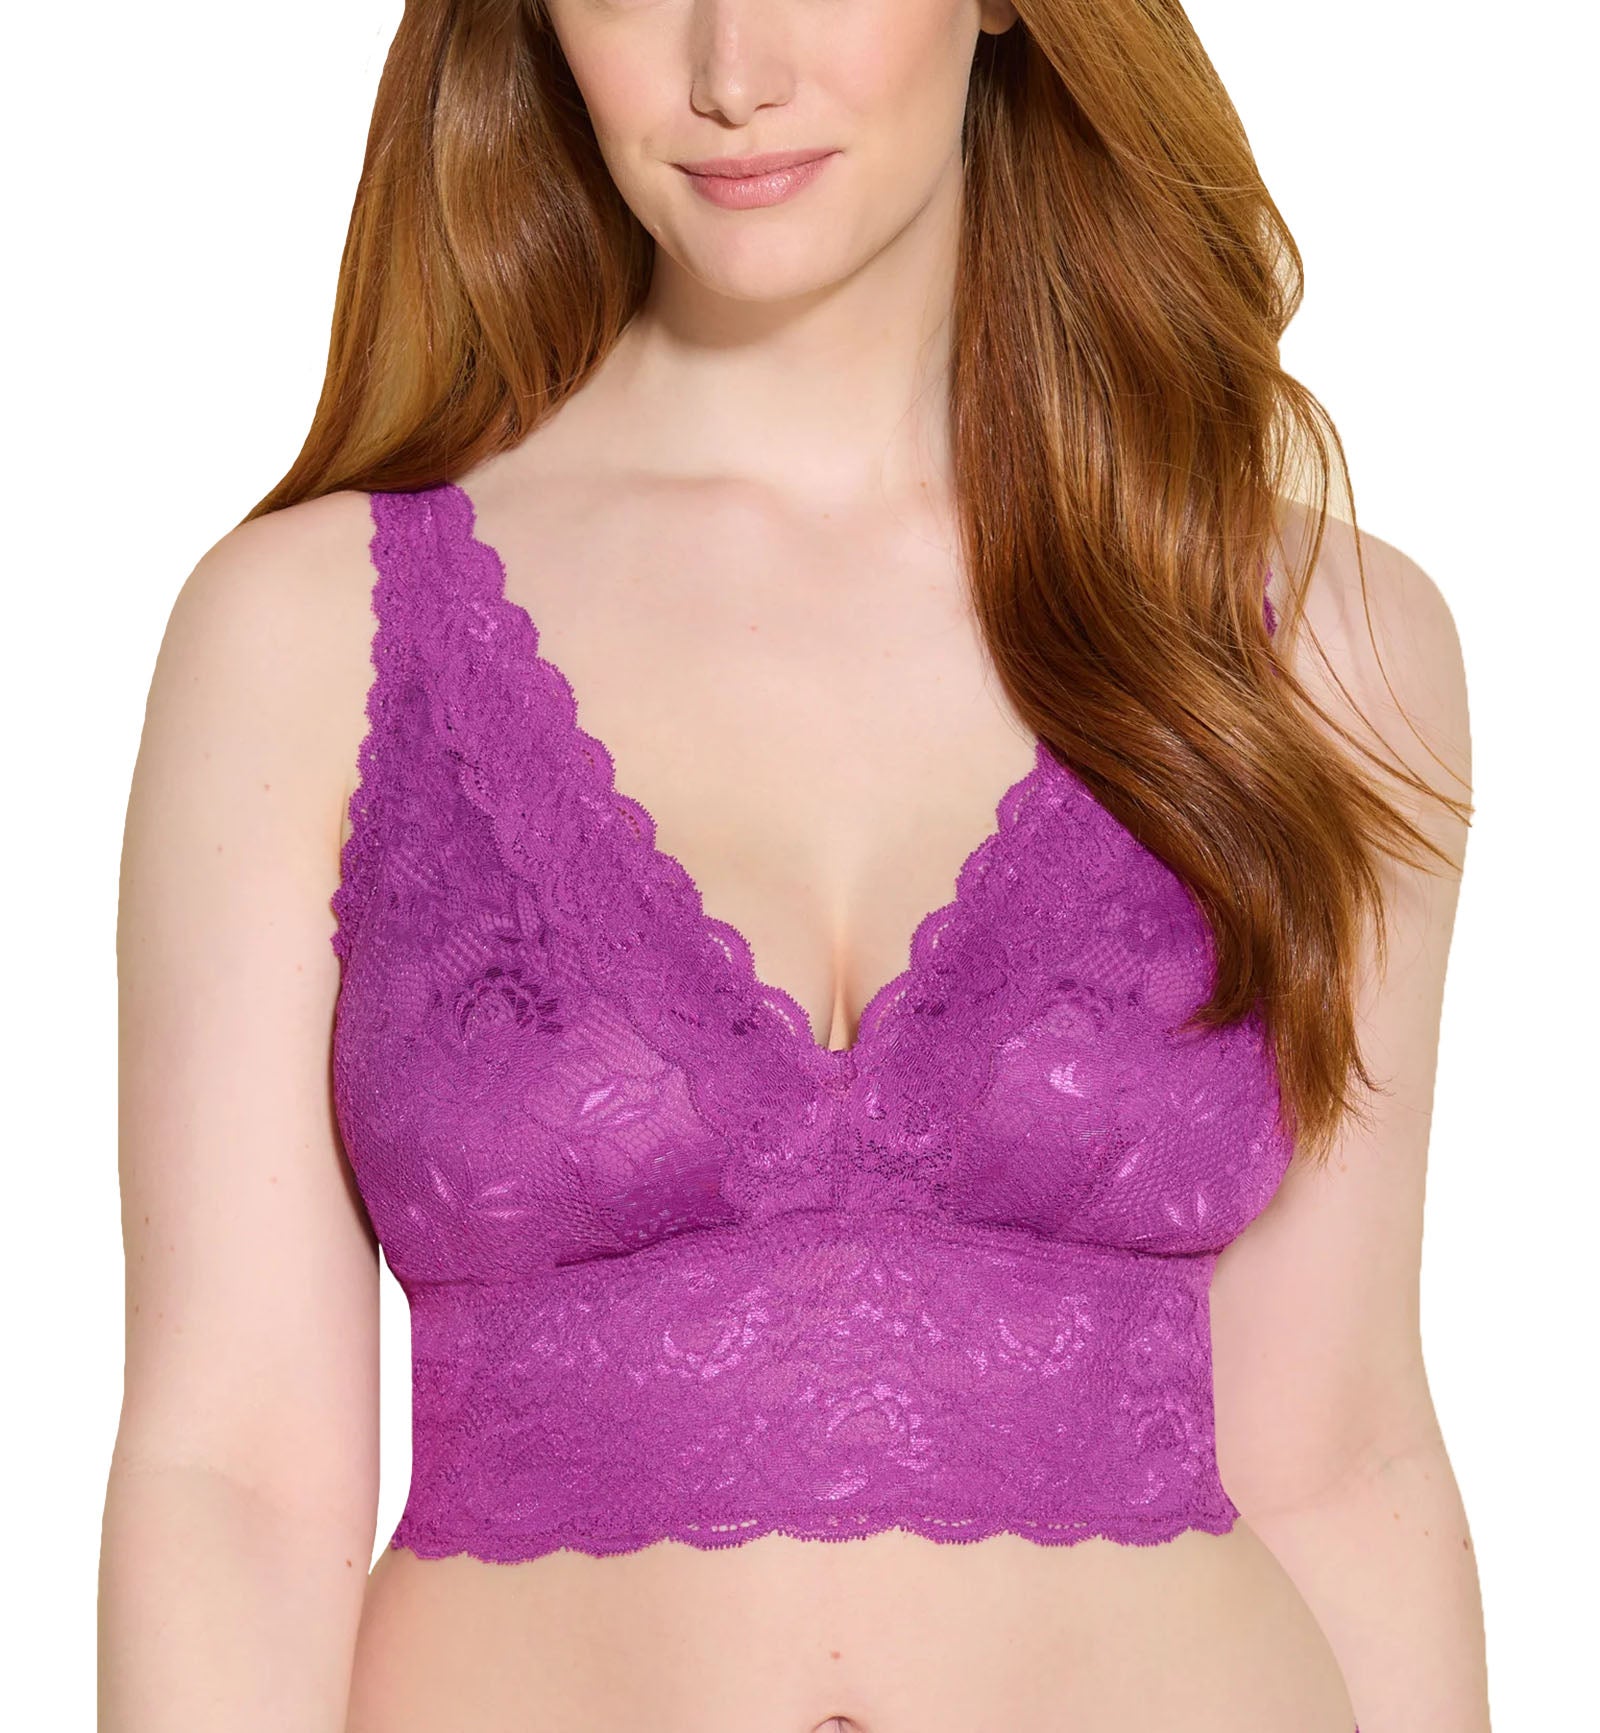 New Arrivals Tagged cosabella Page 2 - Breakout Bras